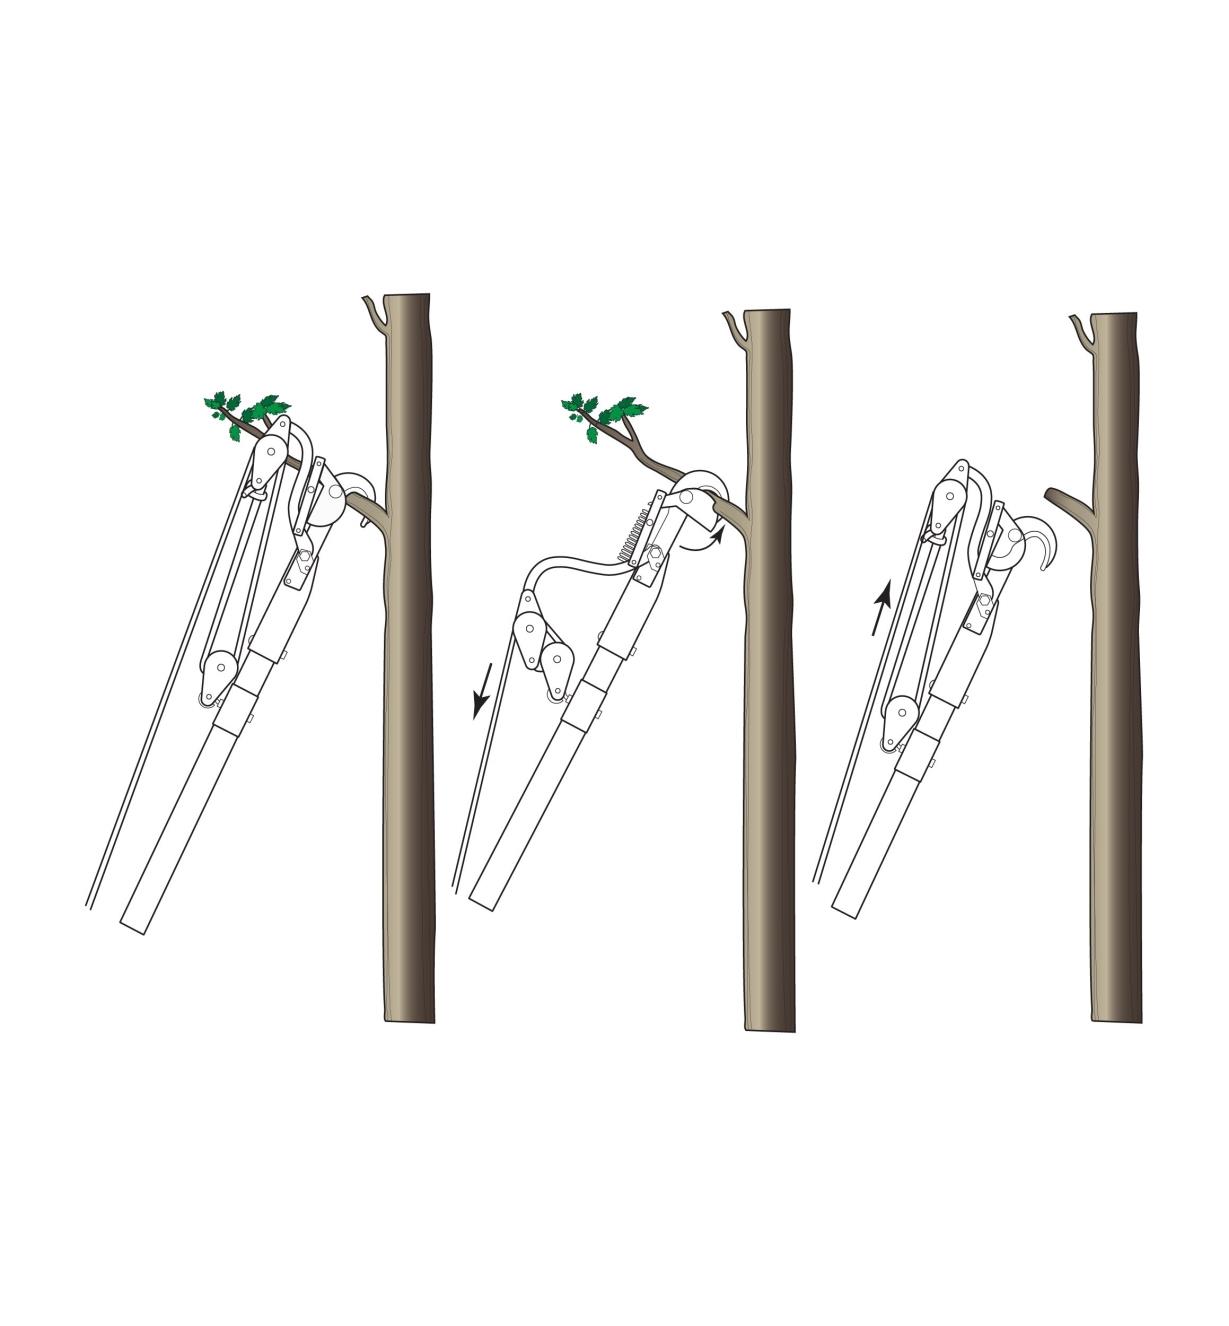 Diagram demonstrates three steps to pruning a branch